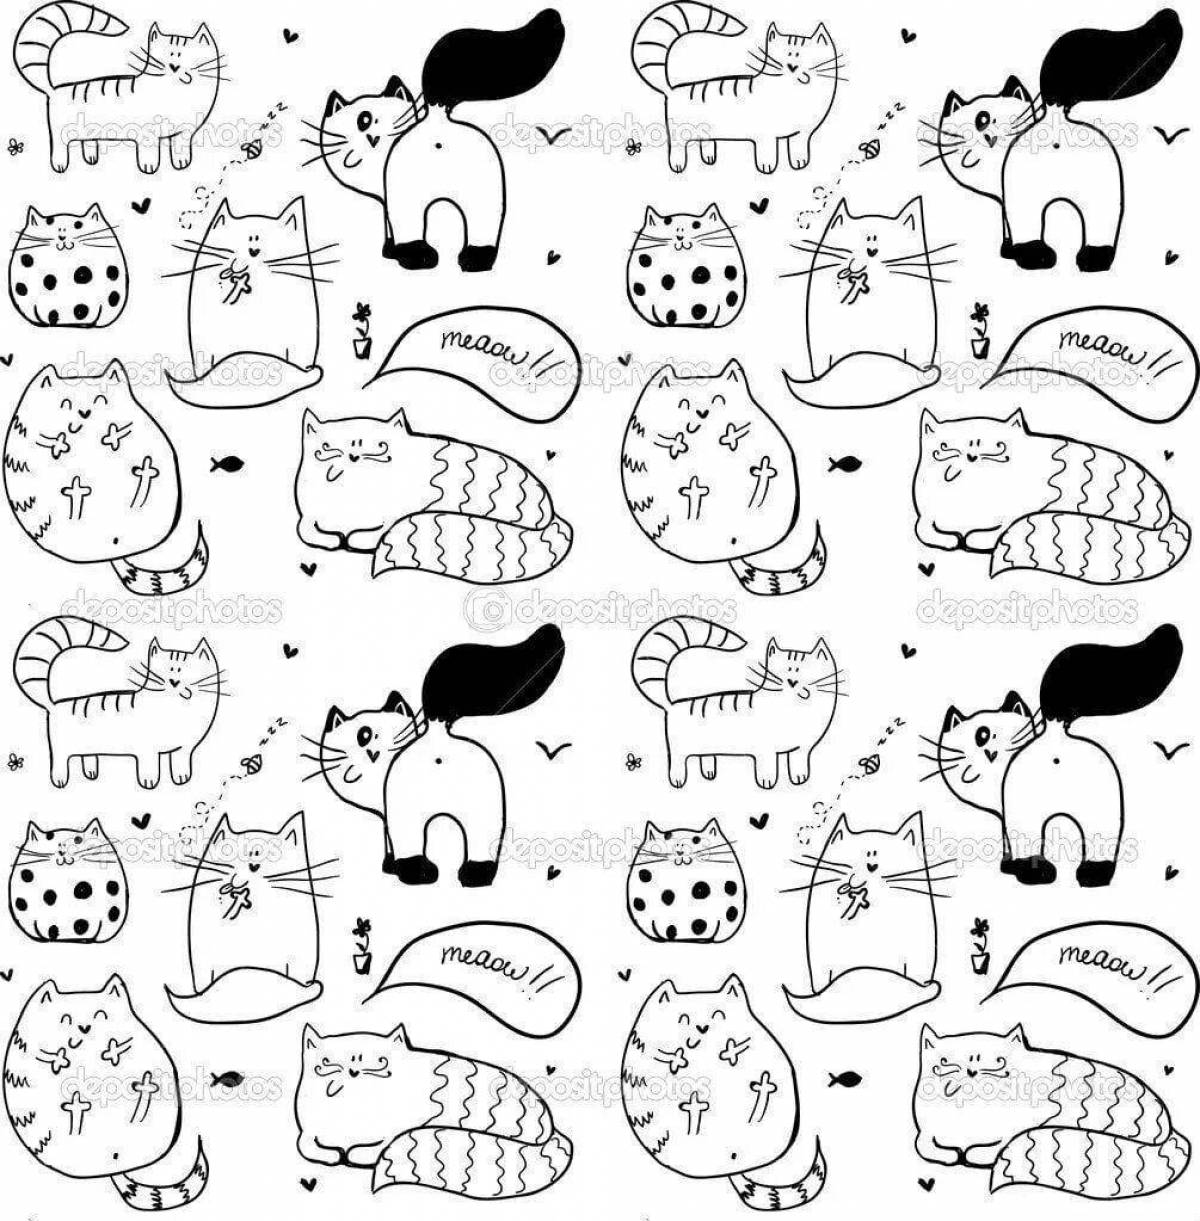 Adorable cat sticker coloring book